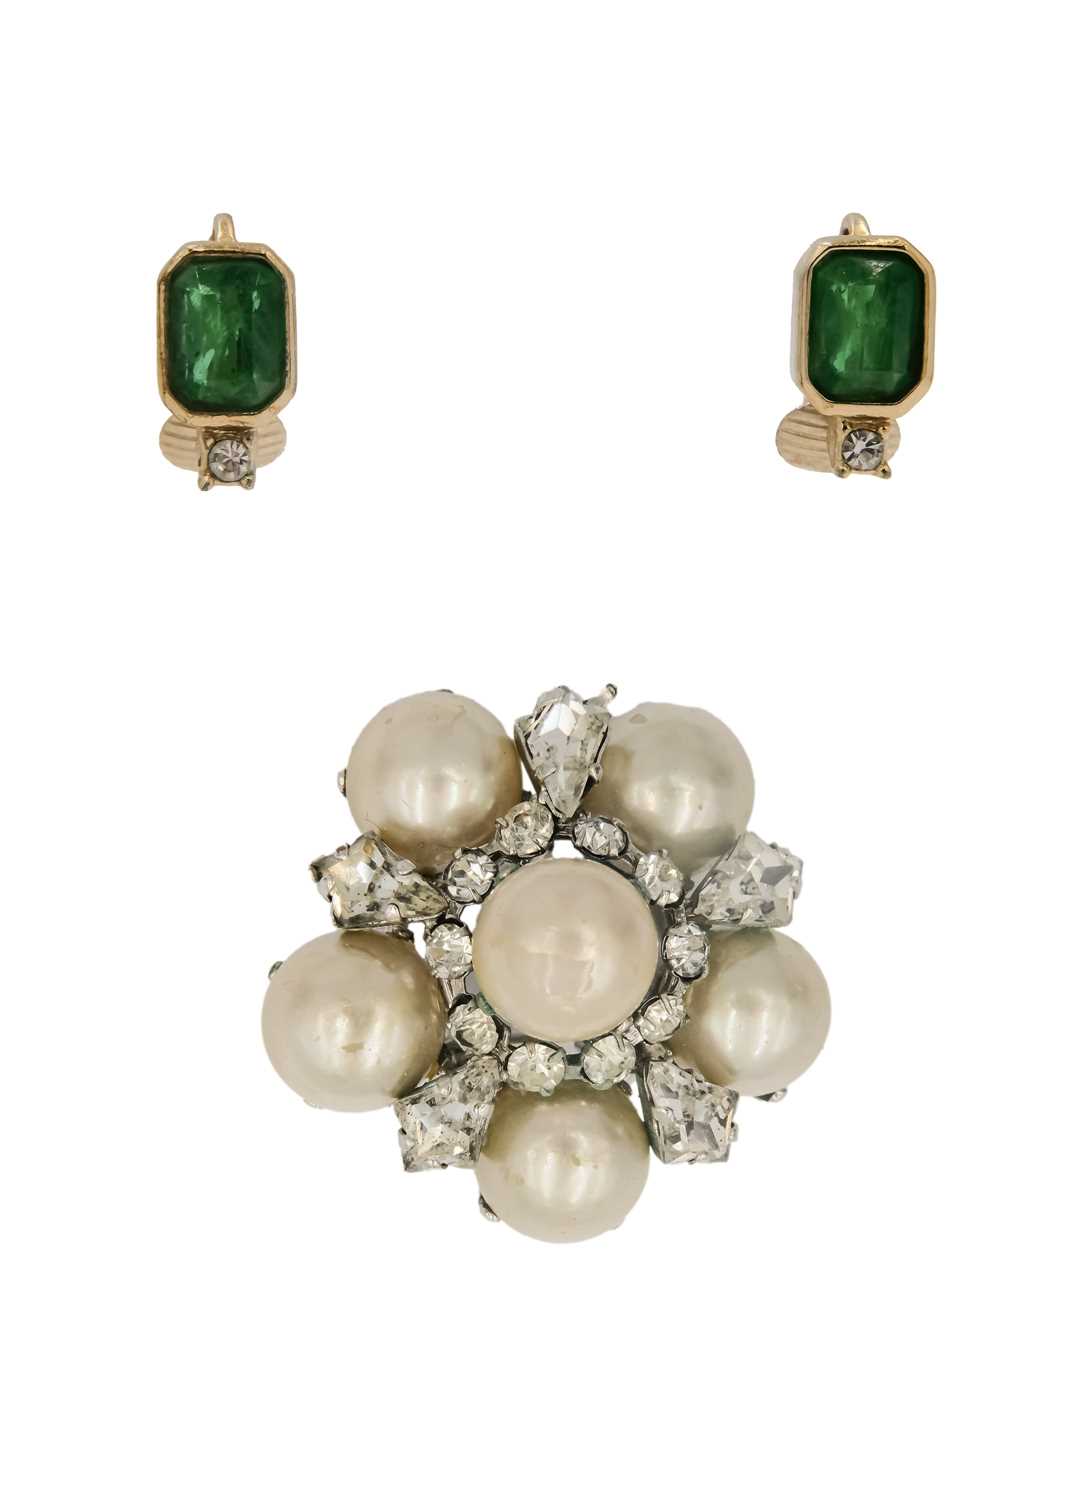 CHRISTIAN DIOR - A pair of clip earrings and a faux pearl brooch.